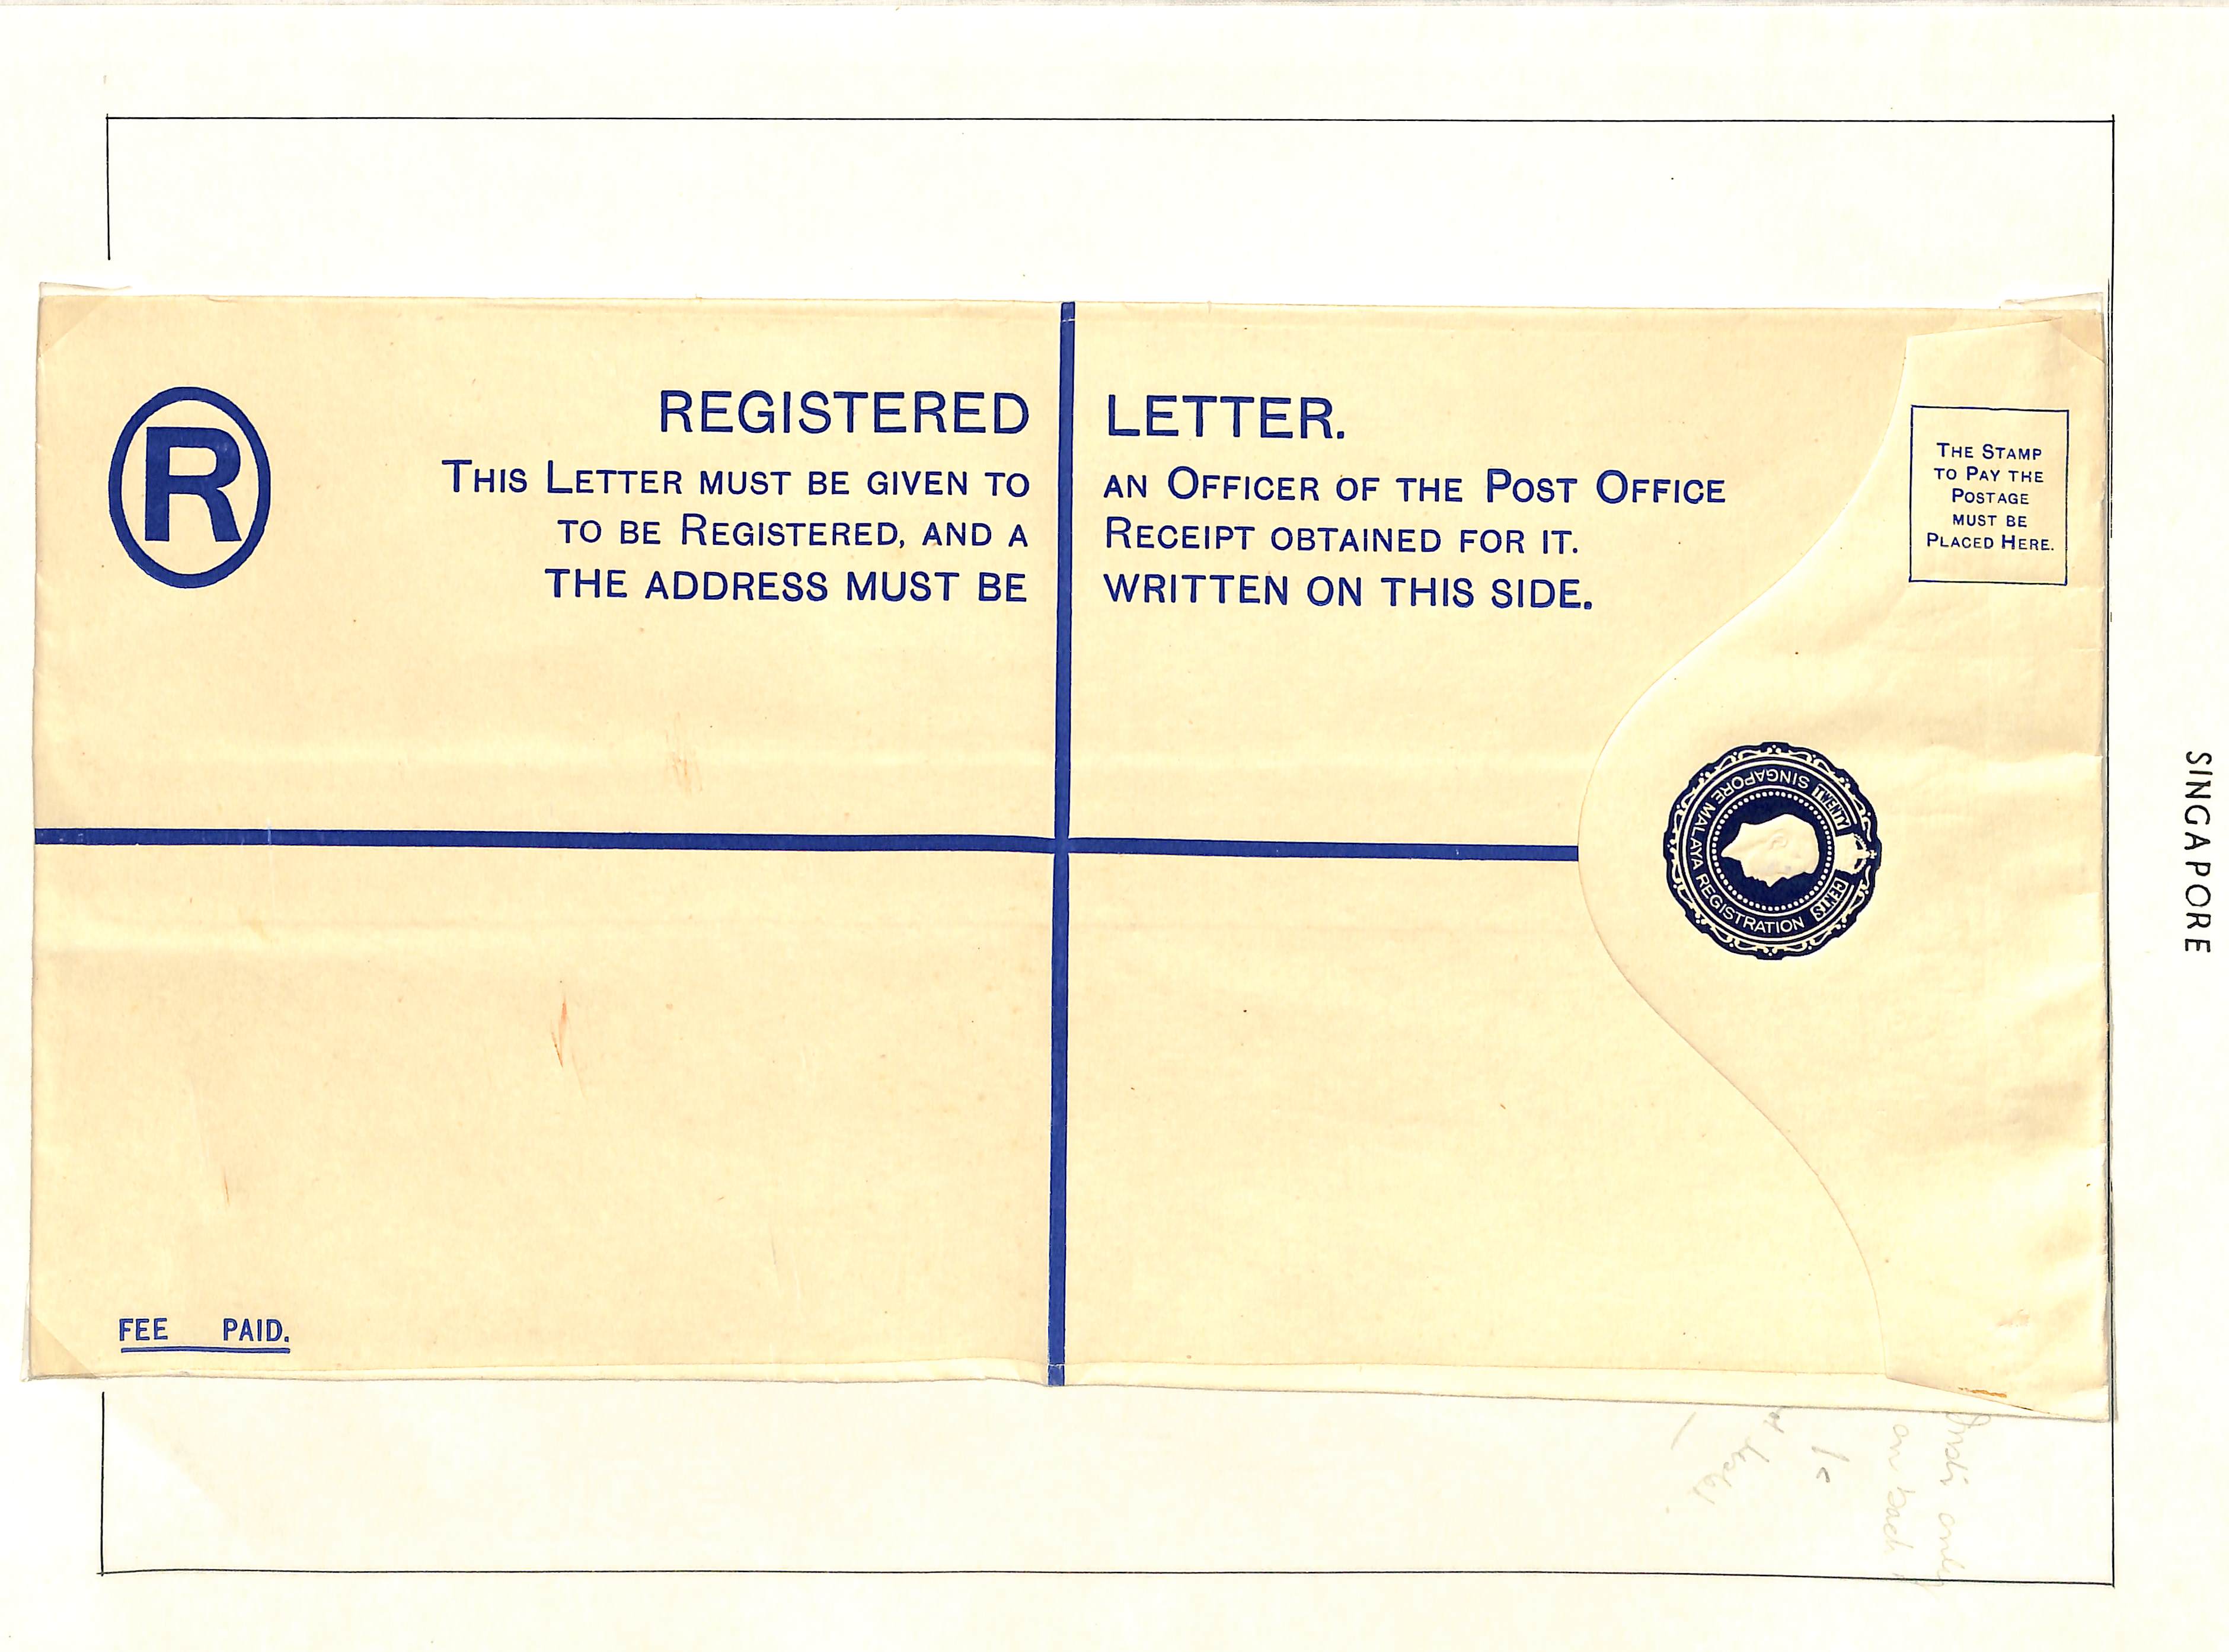 1948-55 KGVI 20c Registration envelopes, first issue without space for senders address on reverse, - Image 4 of 4